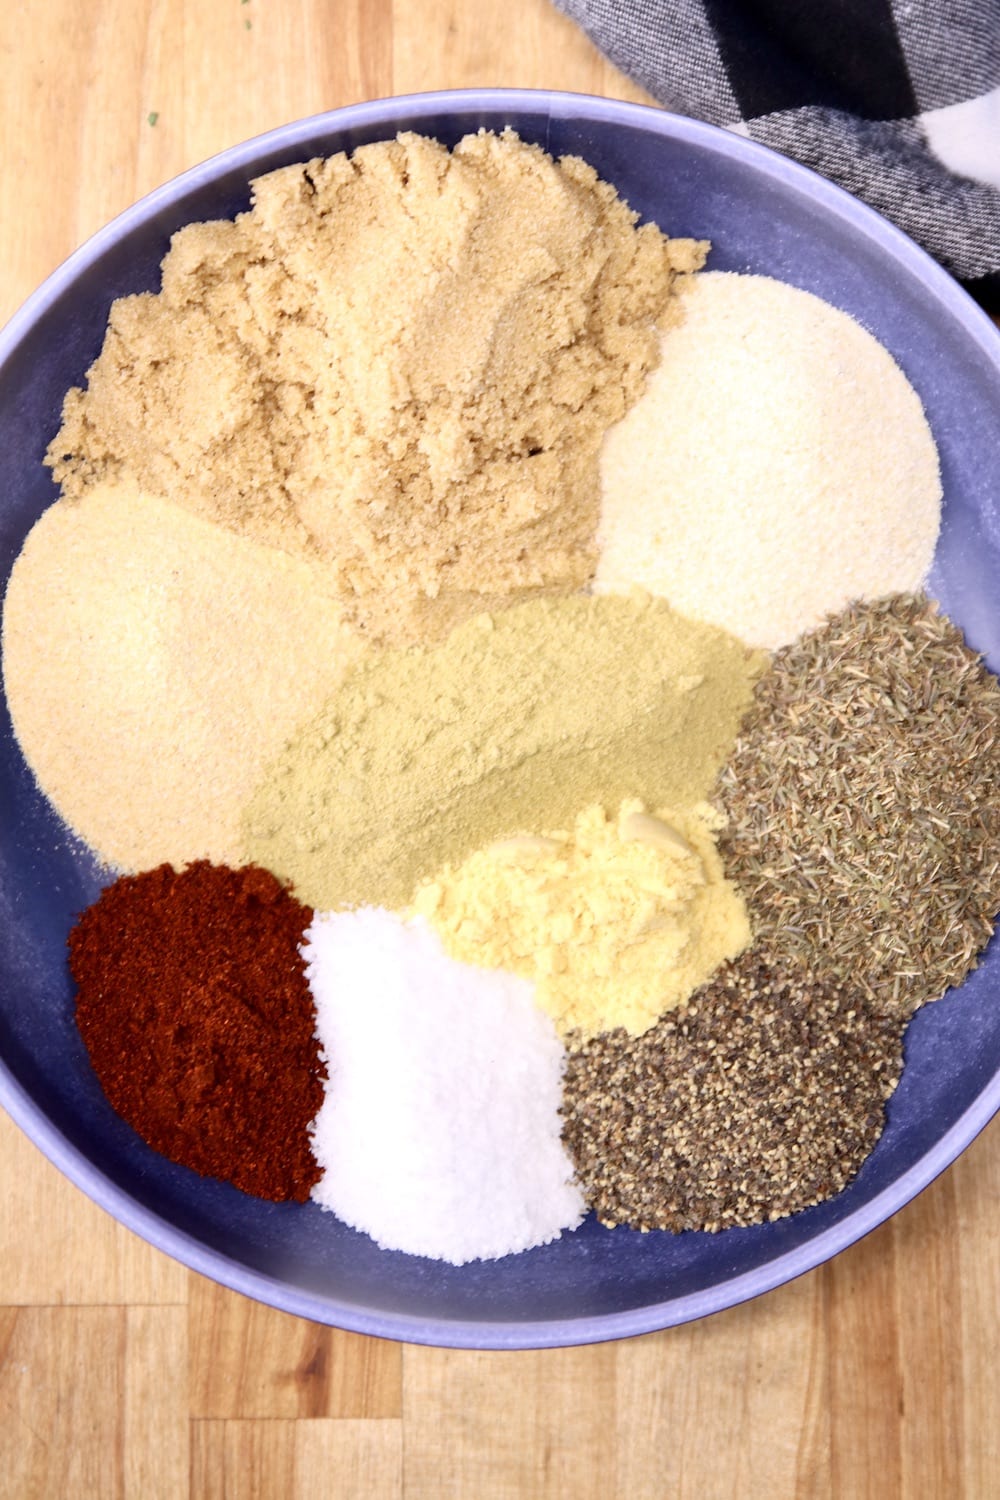 Green chile dry rub ingredients in a blue bowl